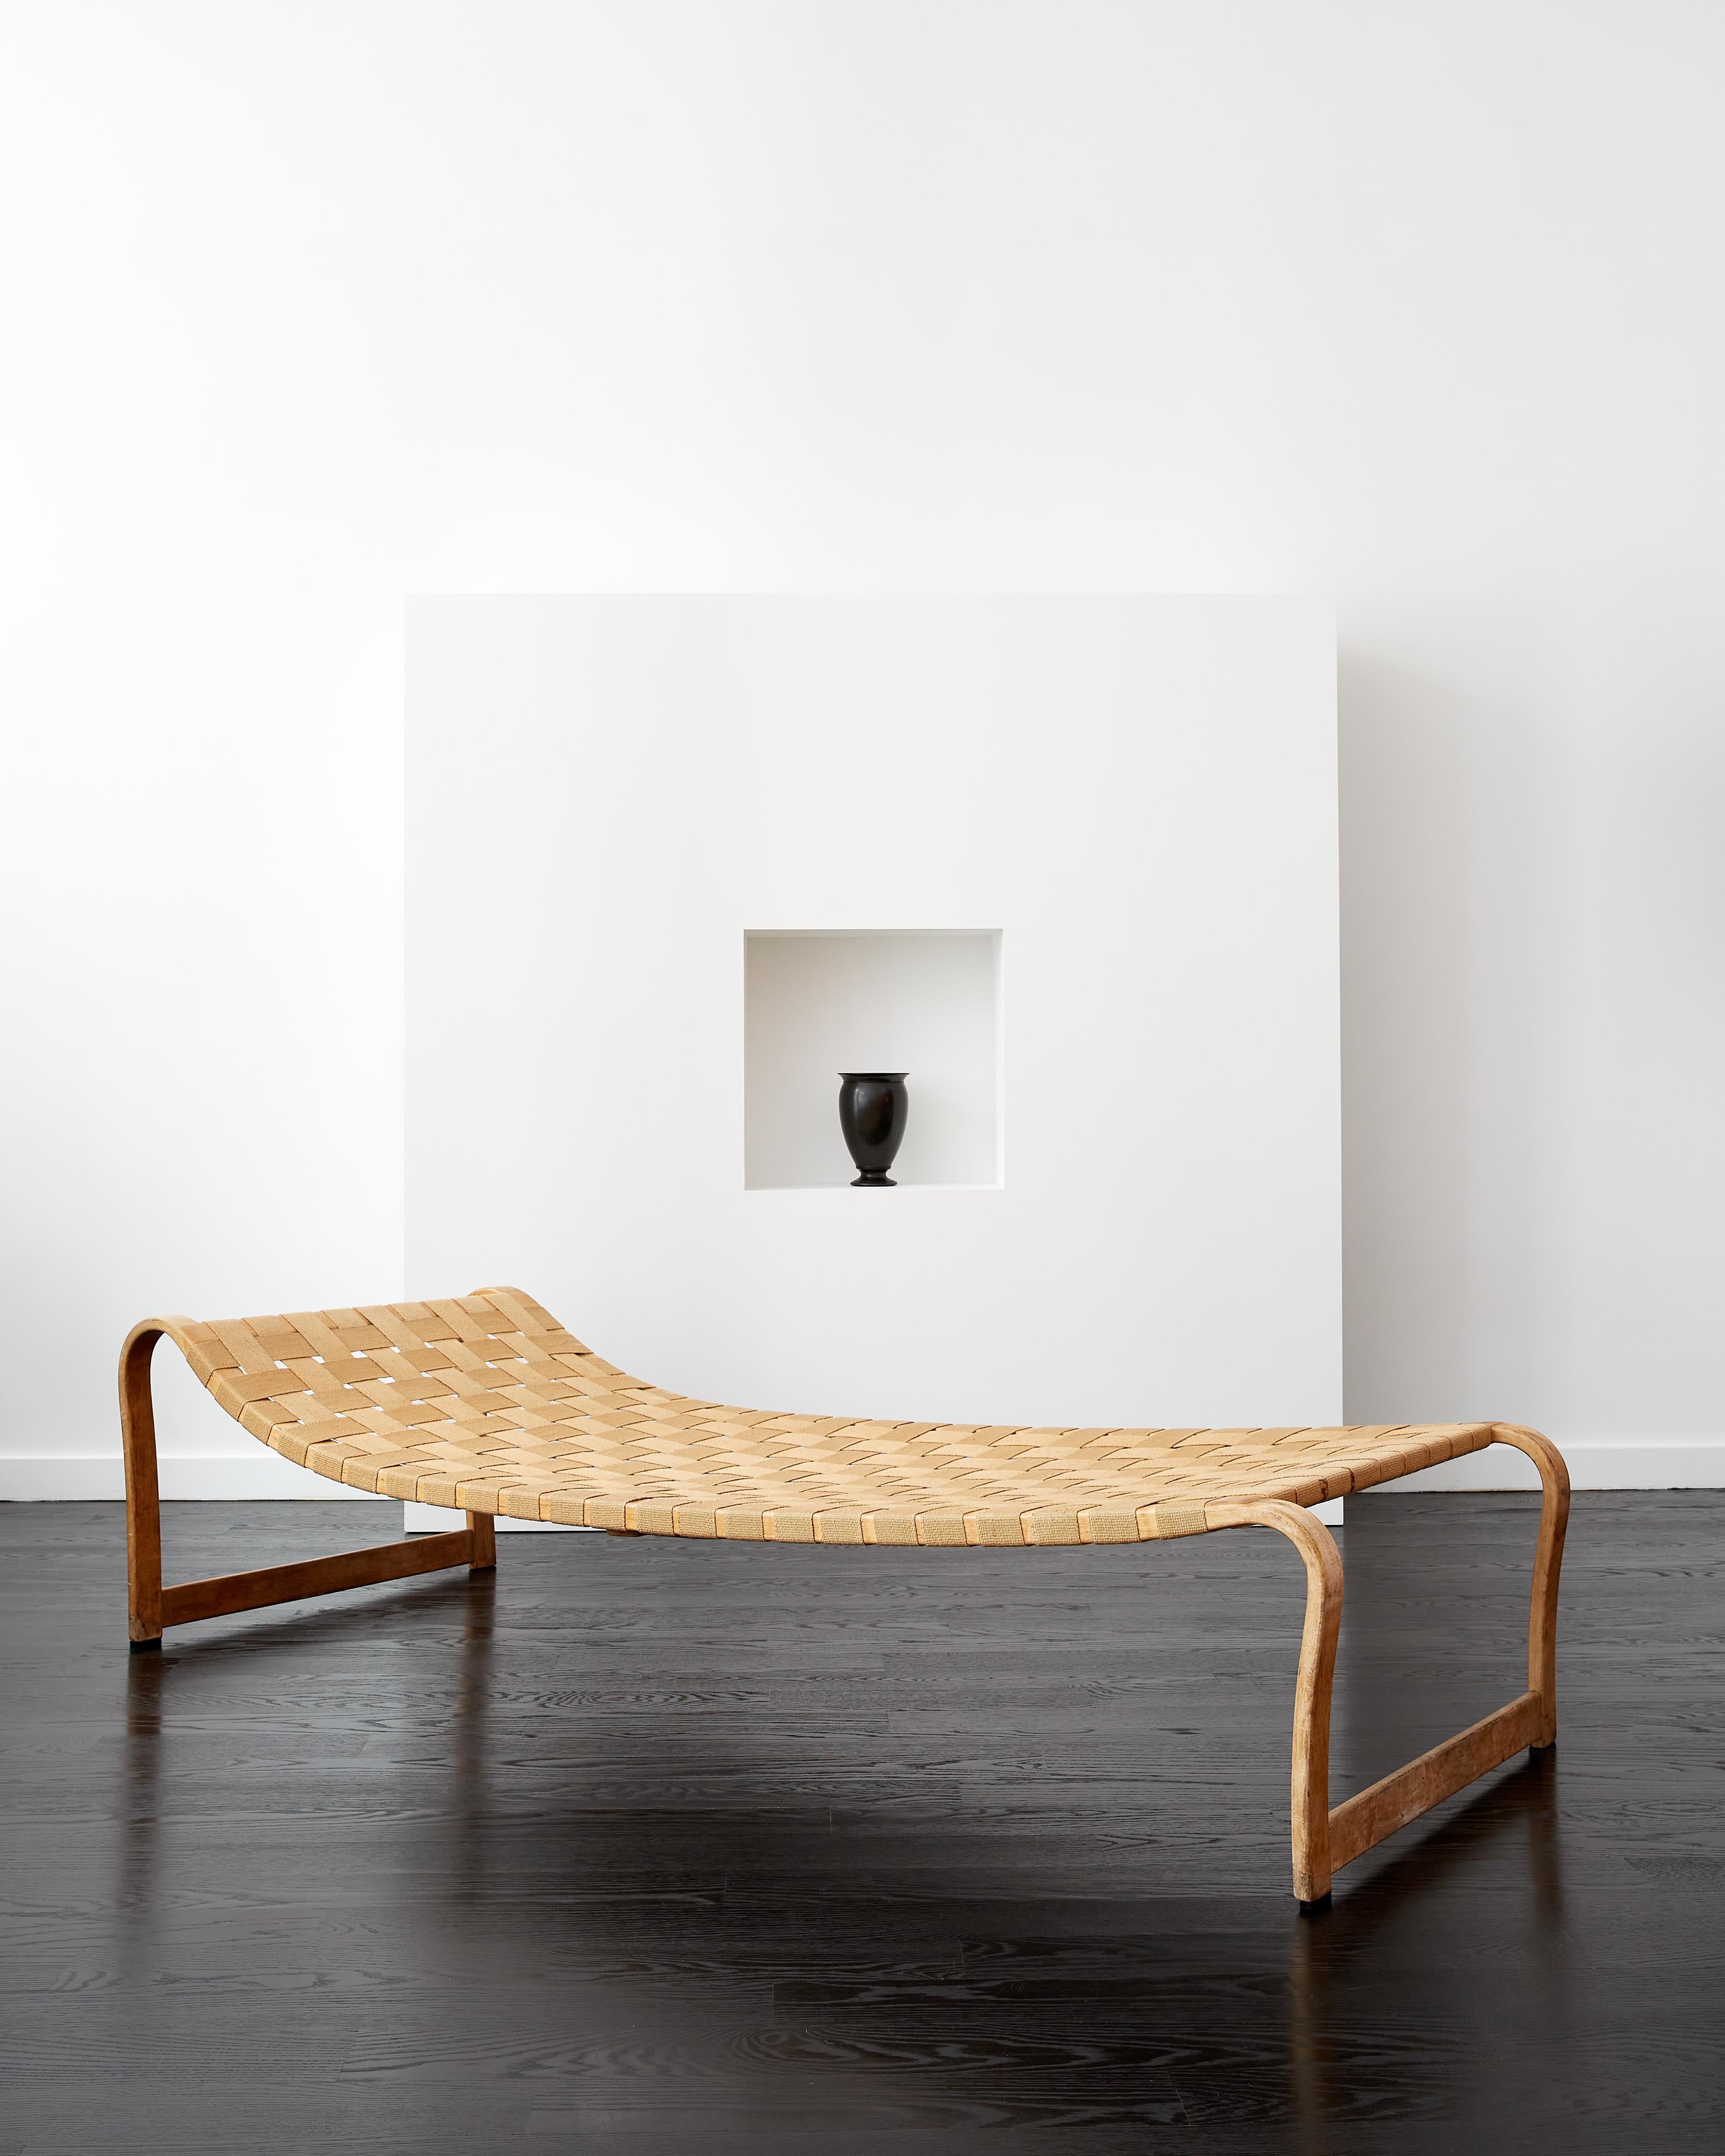 Bruno Mathsson 'Paris' chaise lounge.

Designed in 1936 for the 1937 edition of the Paris International Exposition.

Manufactured by Firma Karl Mathsson, Sweden c. 1937.

Birch, hemp webbing.

The bent wood frame is all original, untouched